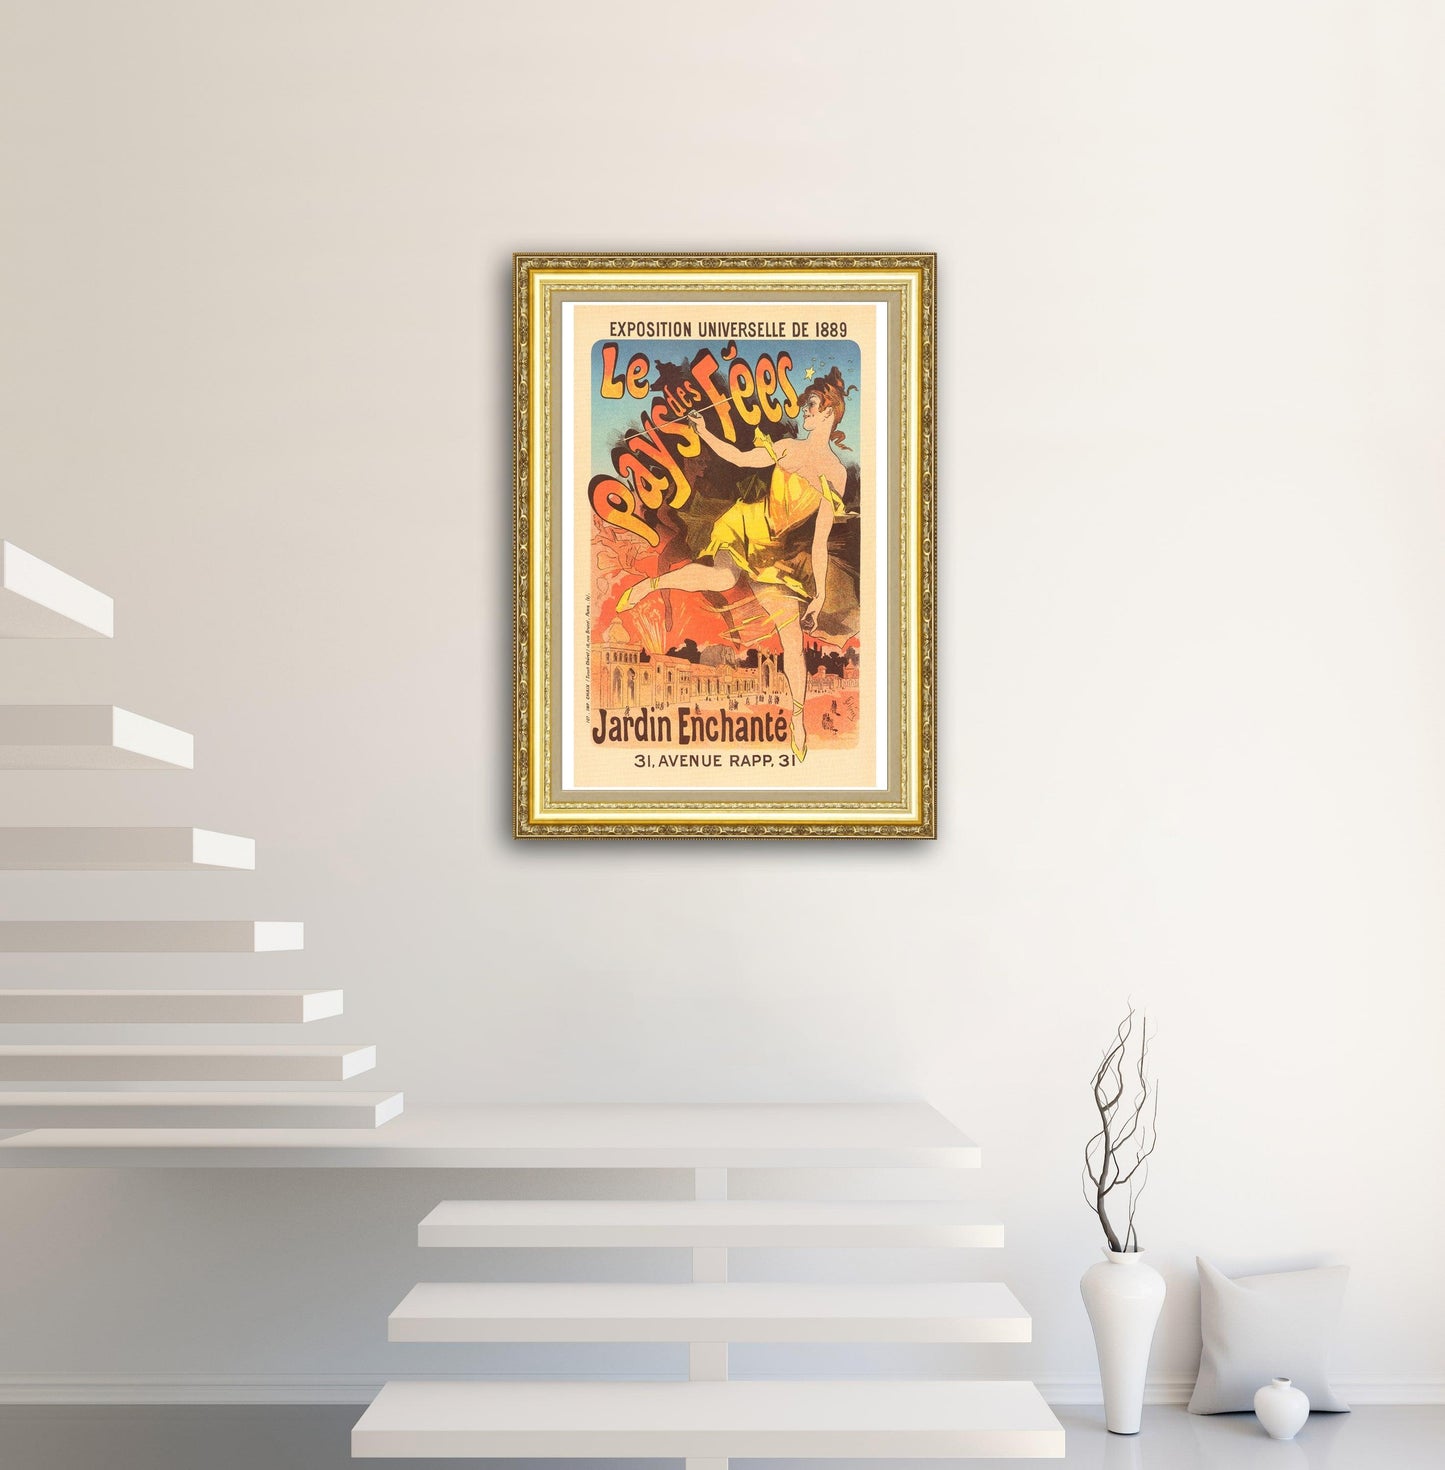 Give your home decor a touch of elegance through our exquisite Exposition Universelle de 1889 - Le Pays des Fées reproduction poster. The artwork is a collage with the exhibition posters design by Jules Chéret (French graphic designer, 1836-1932). Year of created 1889.